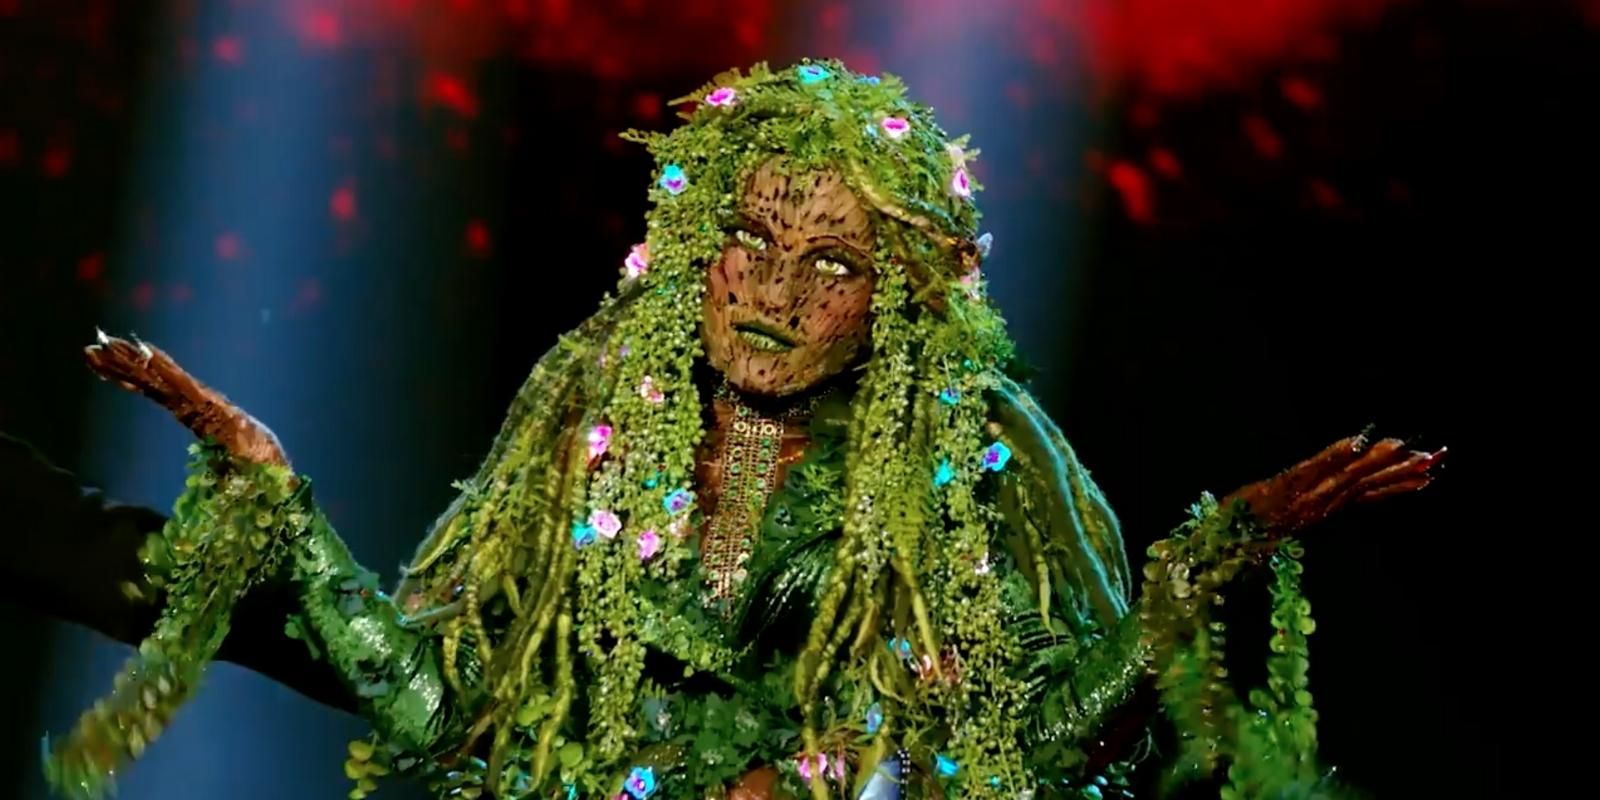 Mother Nature (Vivica Fox) poses on stage in The Masked Singer